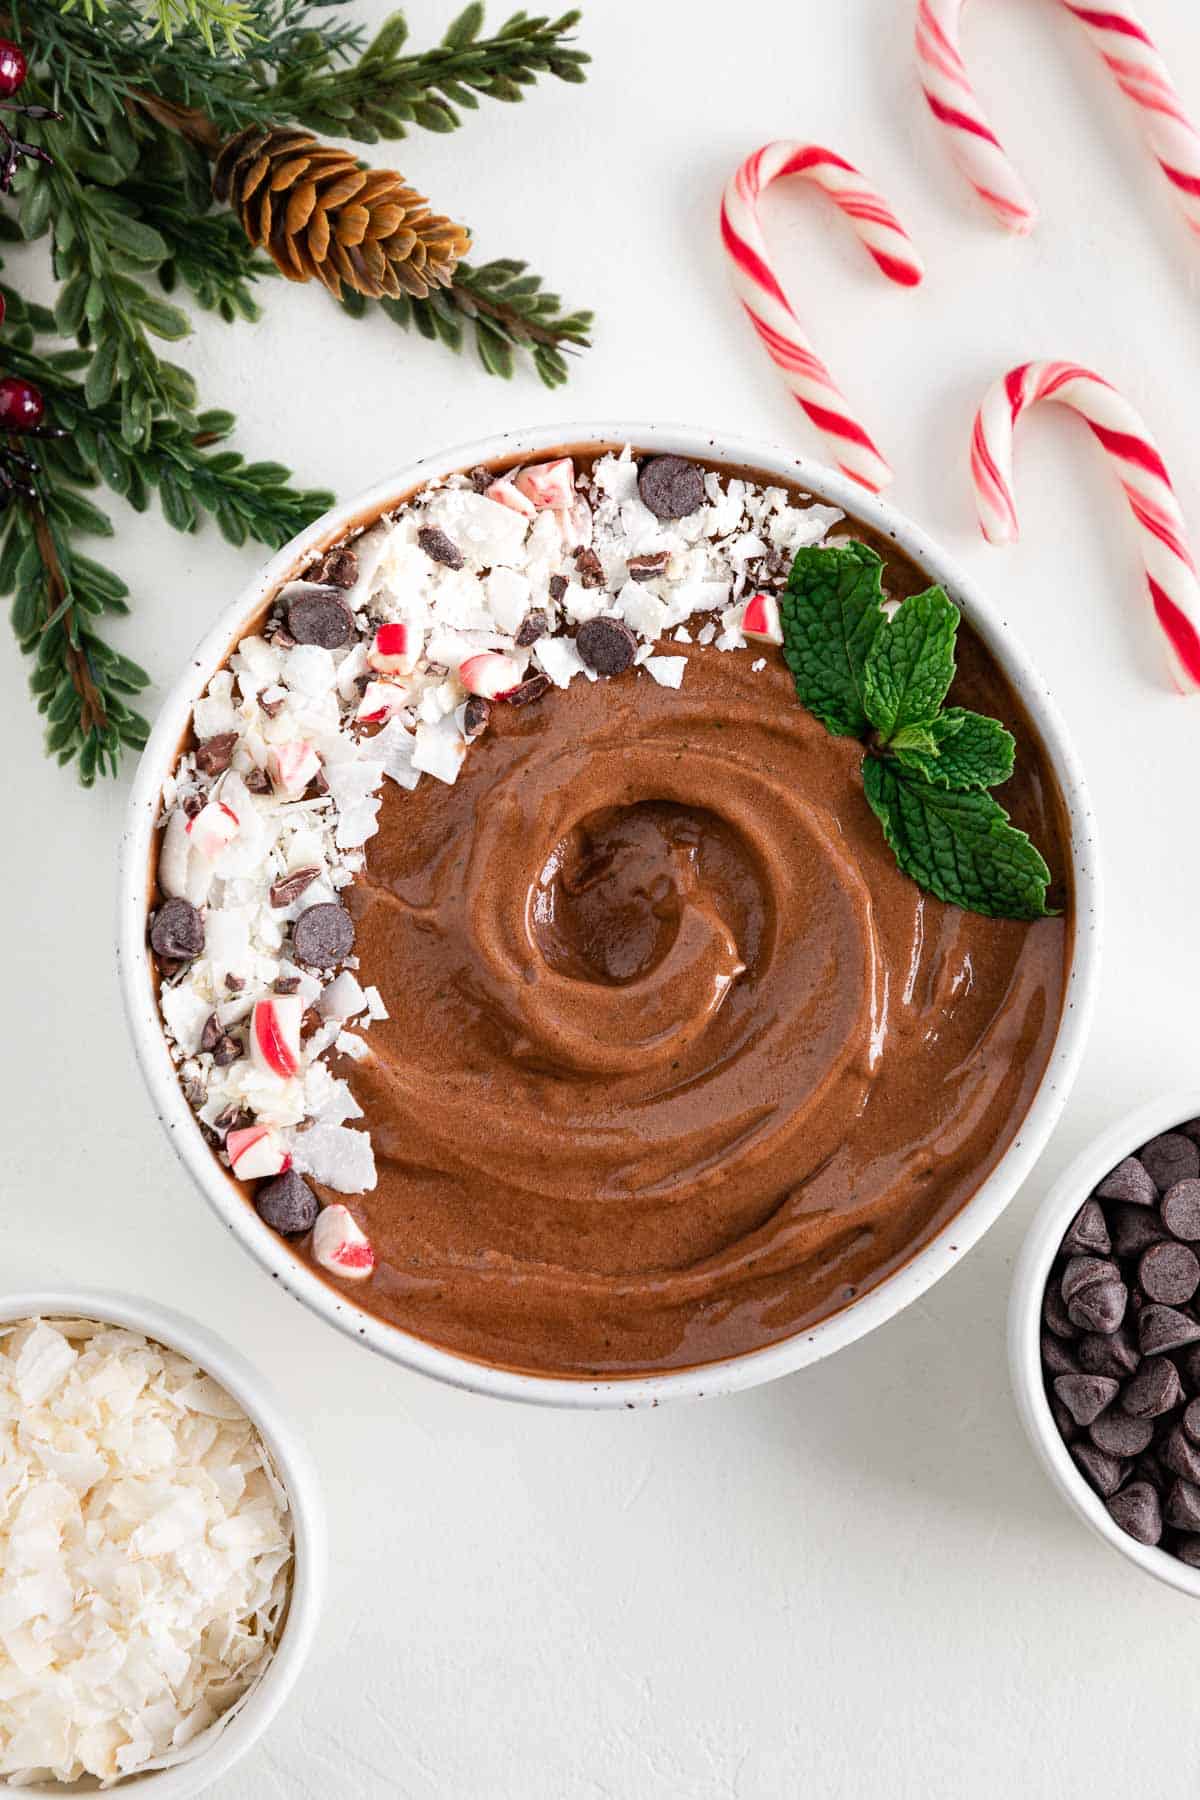 peppermint mocha smoothie bowl surrounded by candy canes, a bowl of chocolate chips, a bowl of coconut flakes, and a holiday leaf